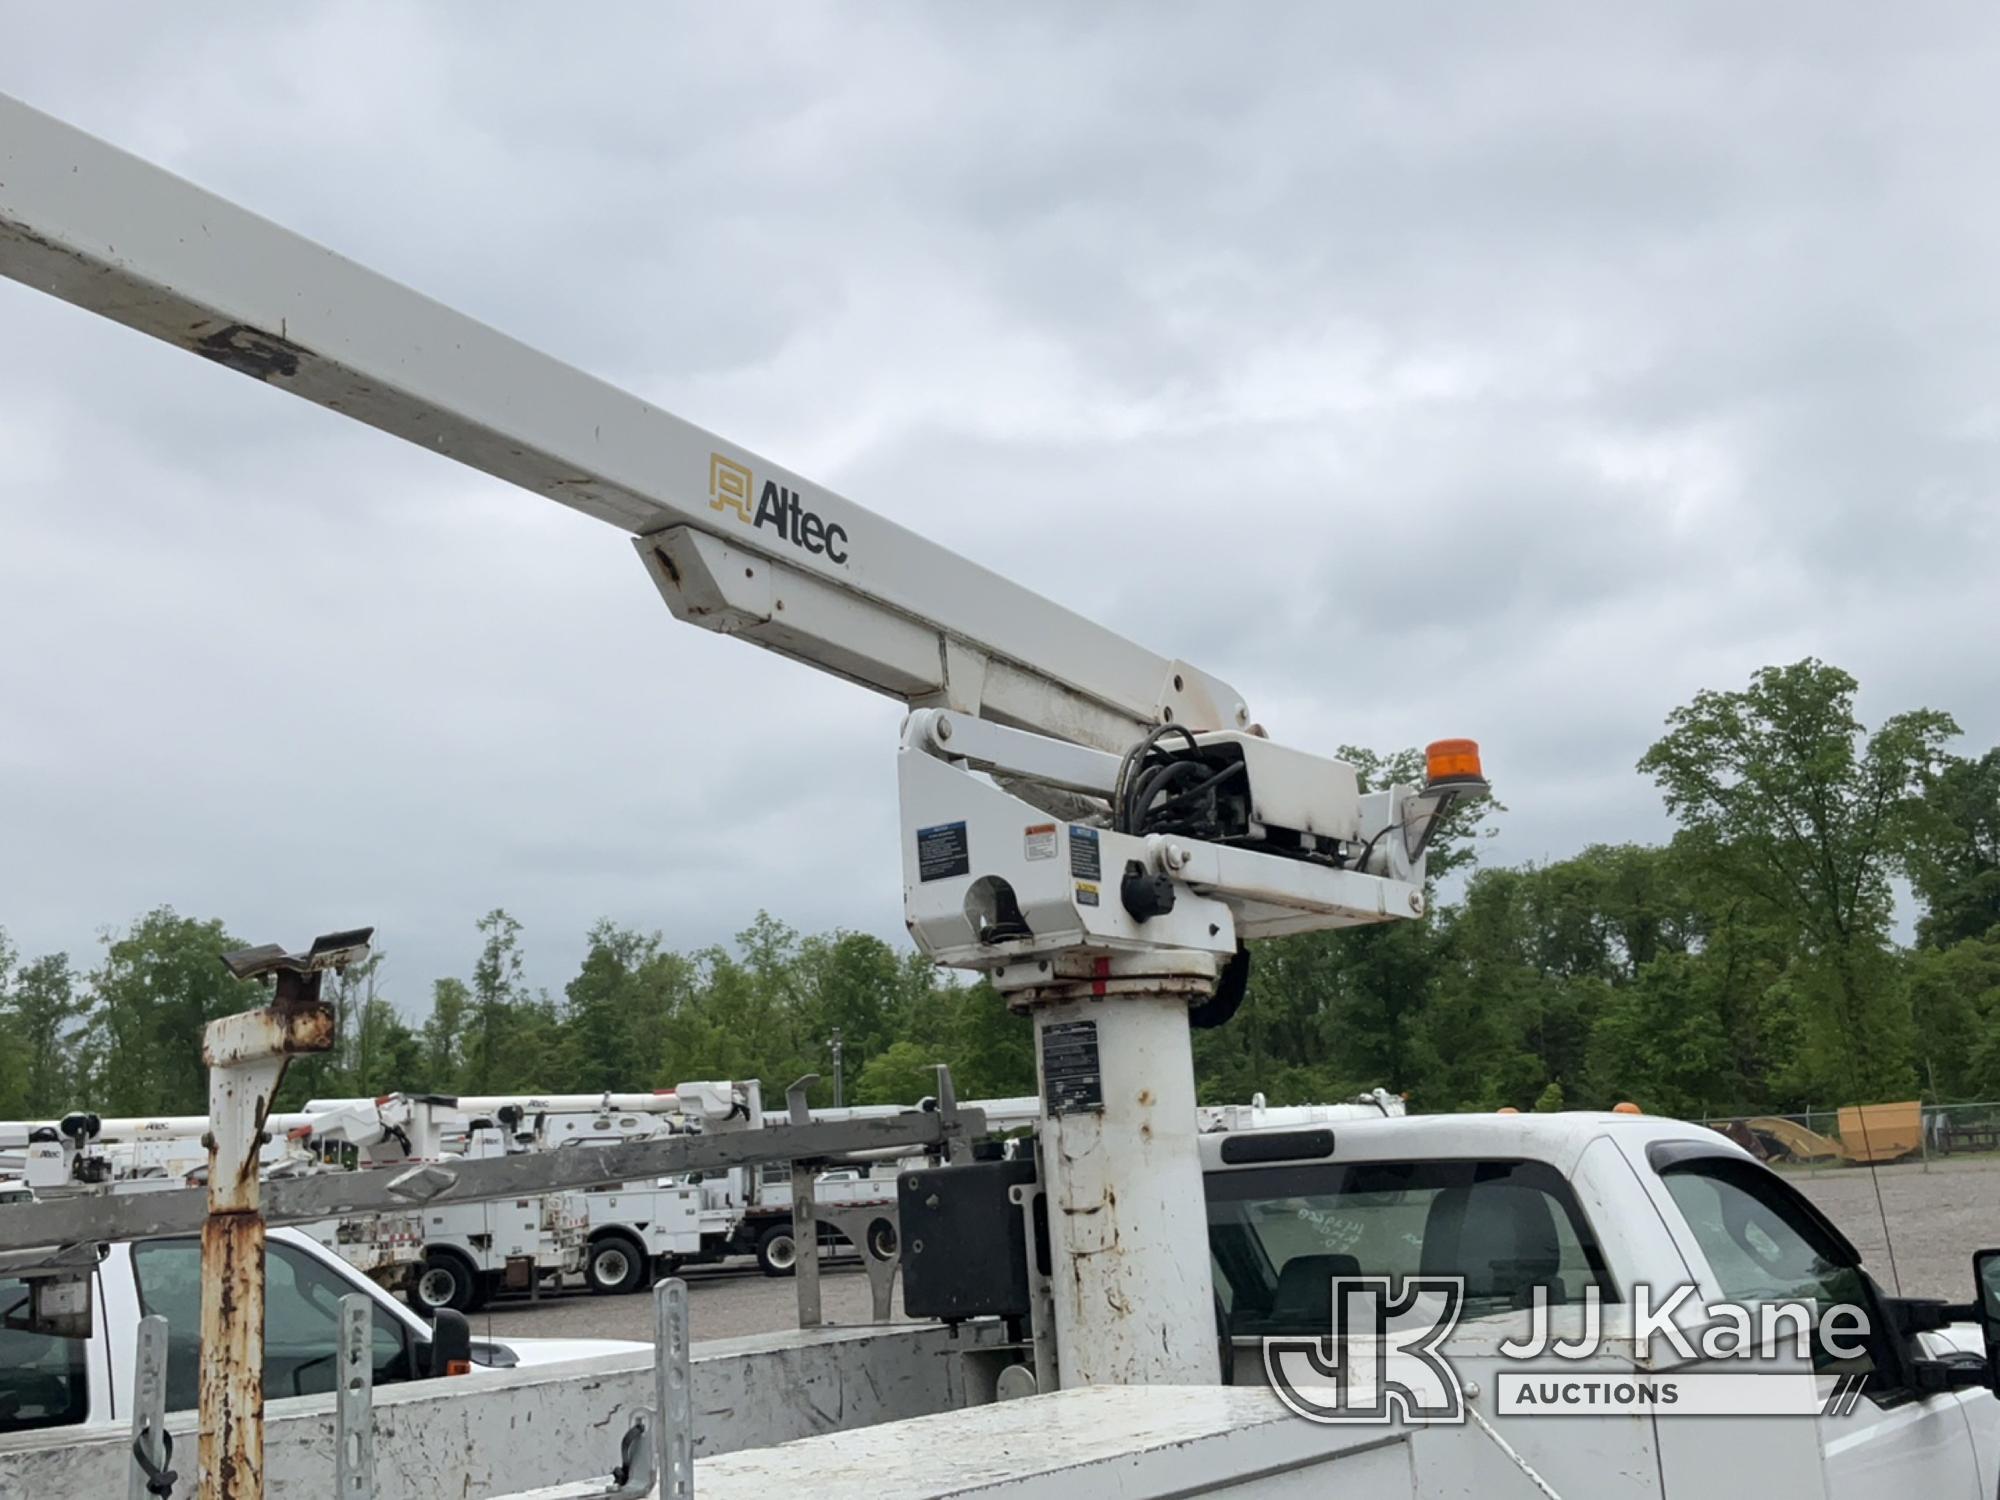 (Verona, KY) Altec AT235P, Telescopic Non-Insulated Cable Placing Bucket Truck mounted behind cab on